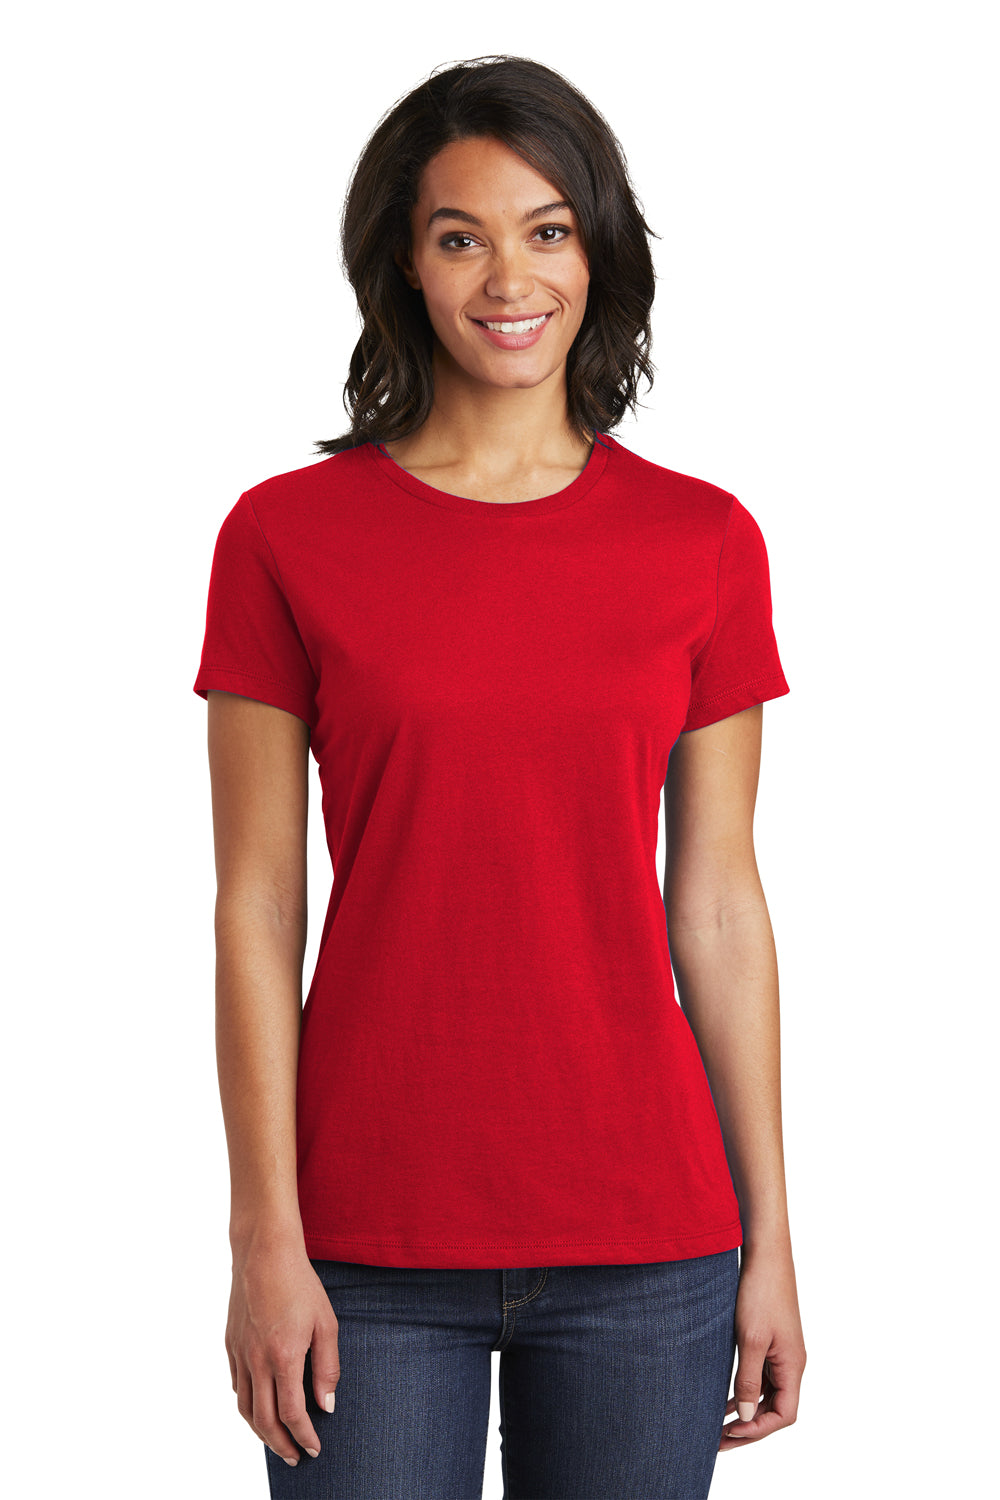 District DT6002 Womens Very Important Short Sleeve Crewneck T-Shirt Red Front